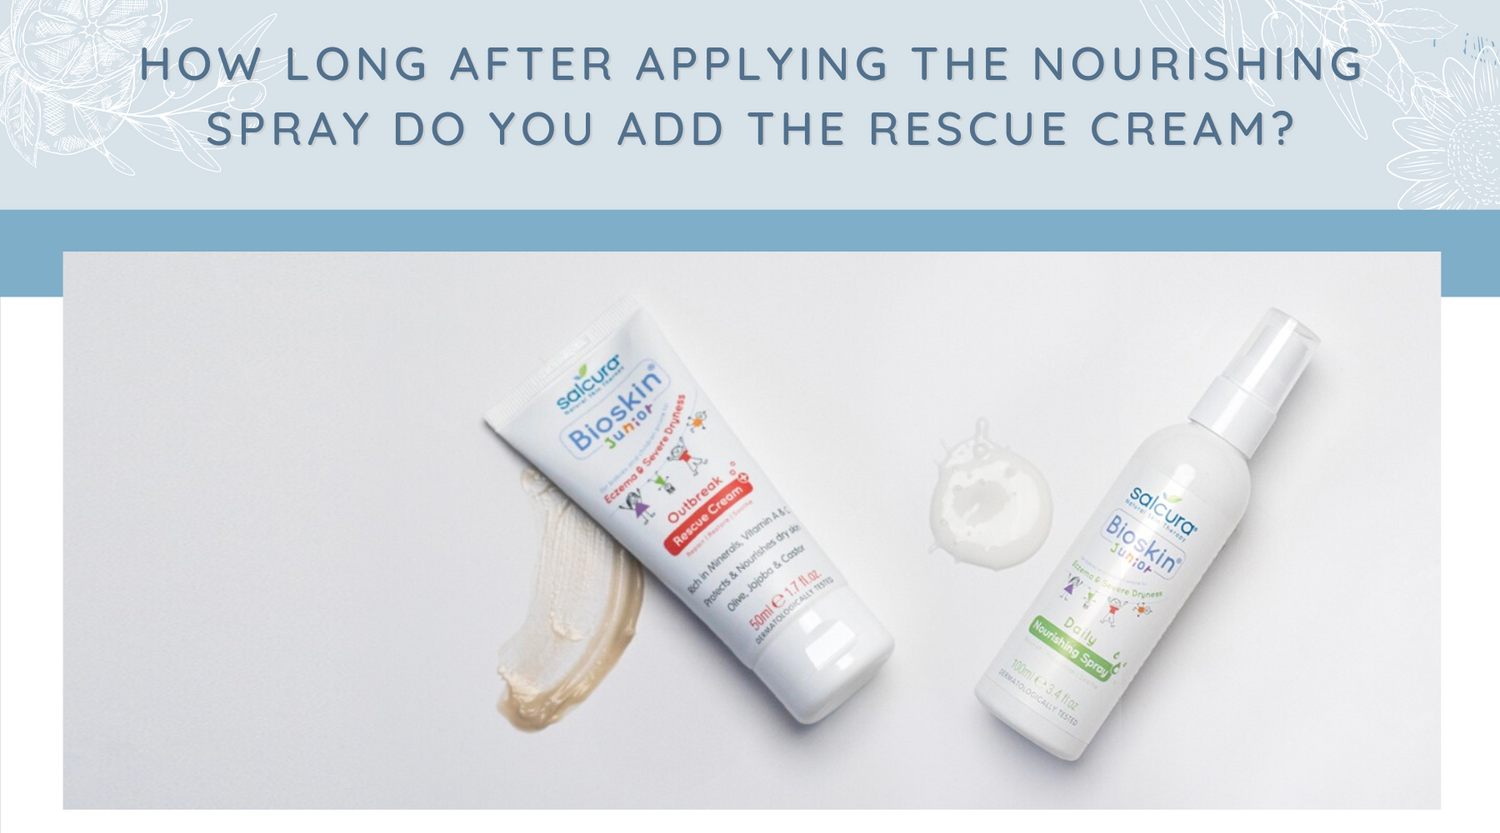 How long after applying the Nourishing Spray do you add the Rescue Cream?